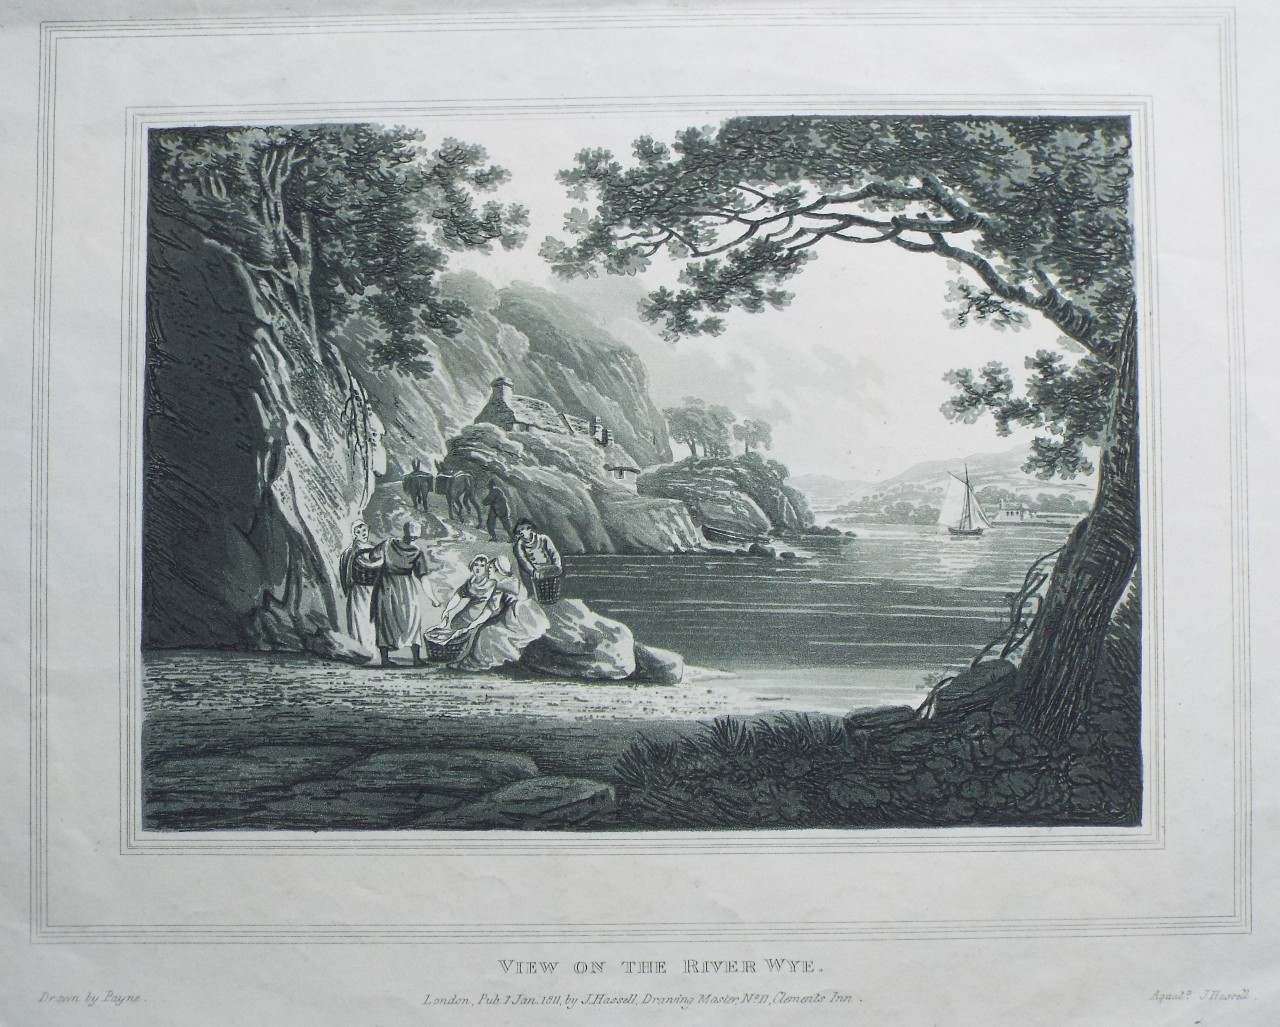 Aquatint - View on the River Wye. - Hassell